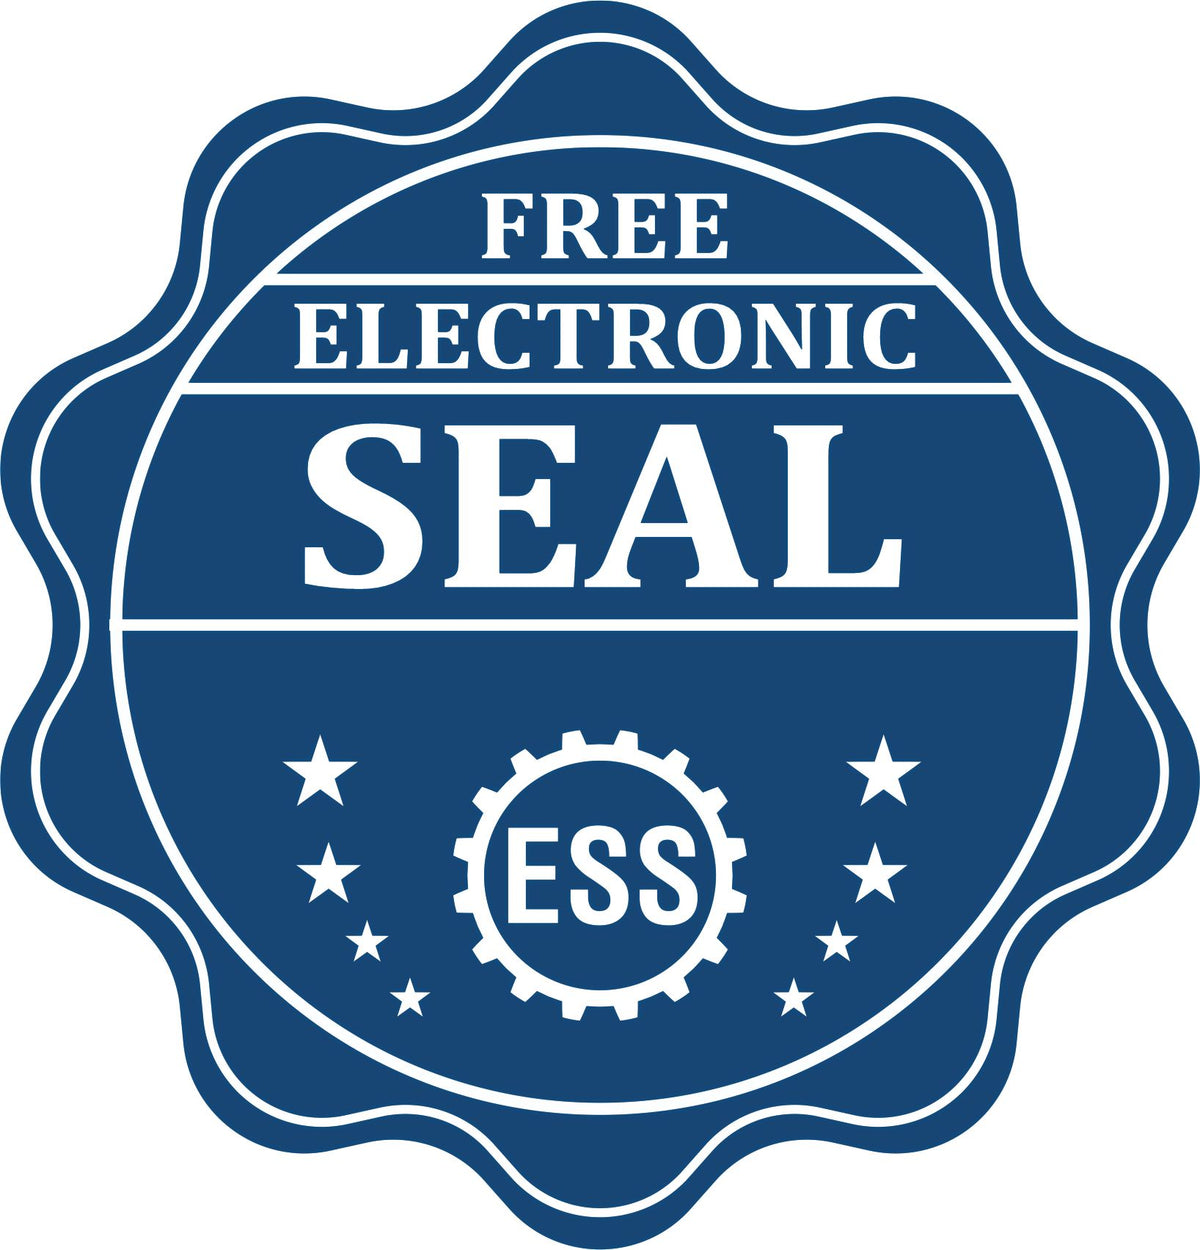 A badge showing a free electronic seal for the Gift Oklahoma Engineer Seal with stars and the ESS gear on the emblem.